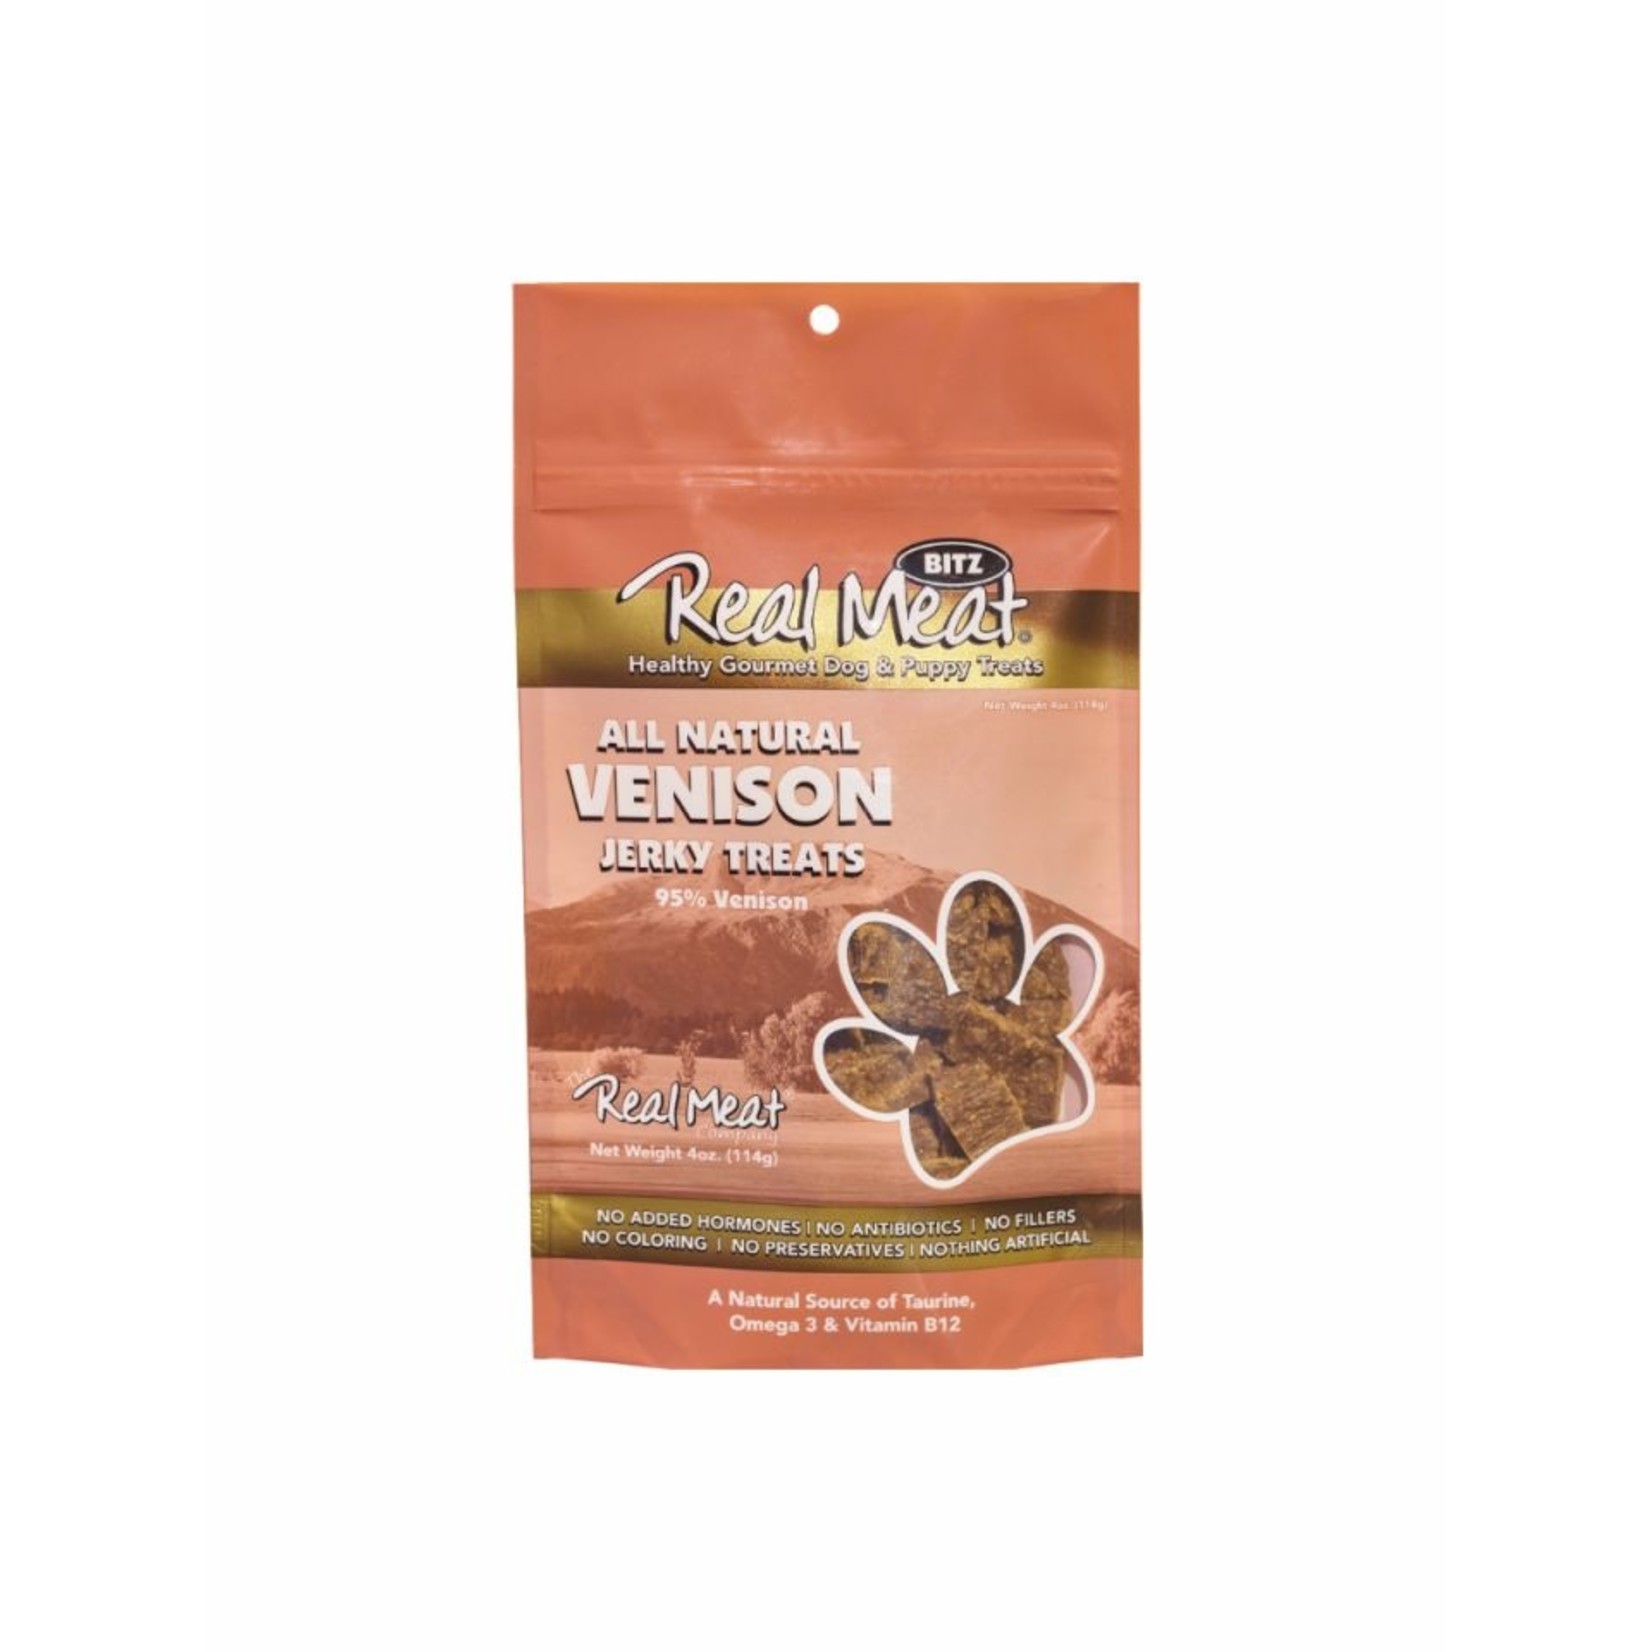 Real Meat Real Meat 95% Meat Jerky All Natural Dog Treats